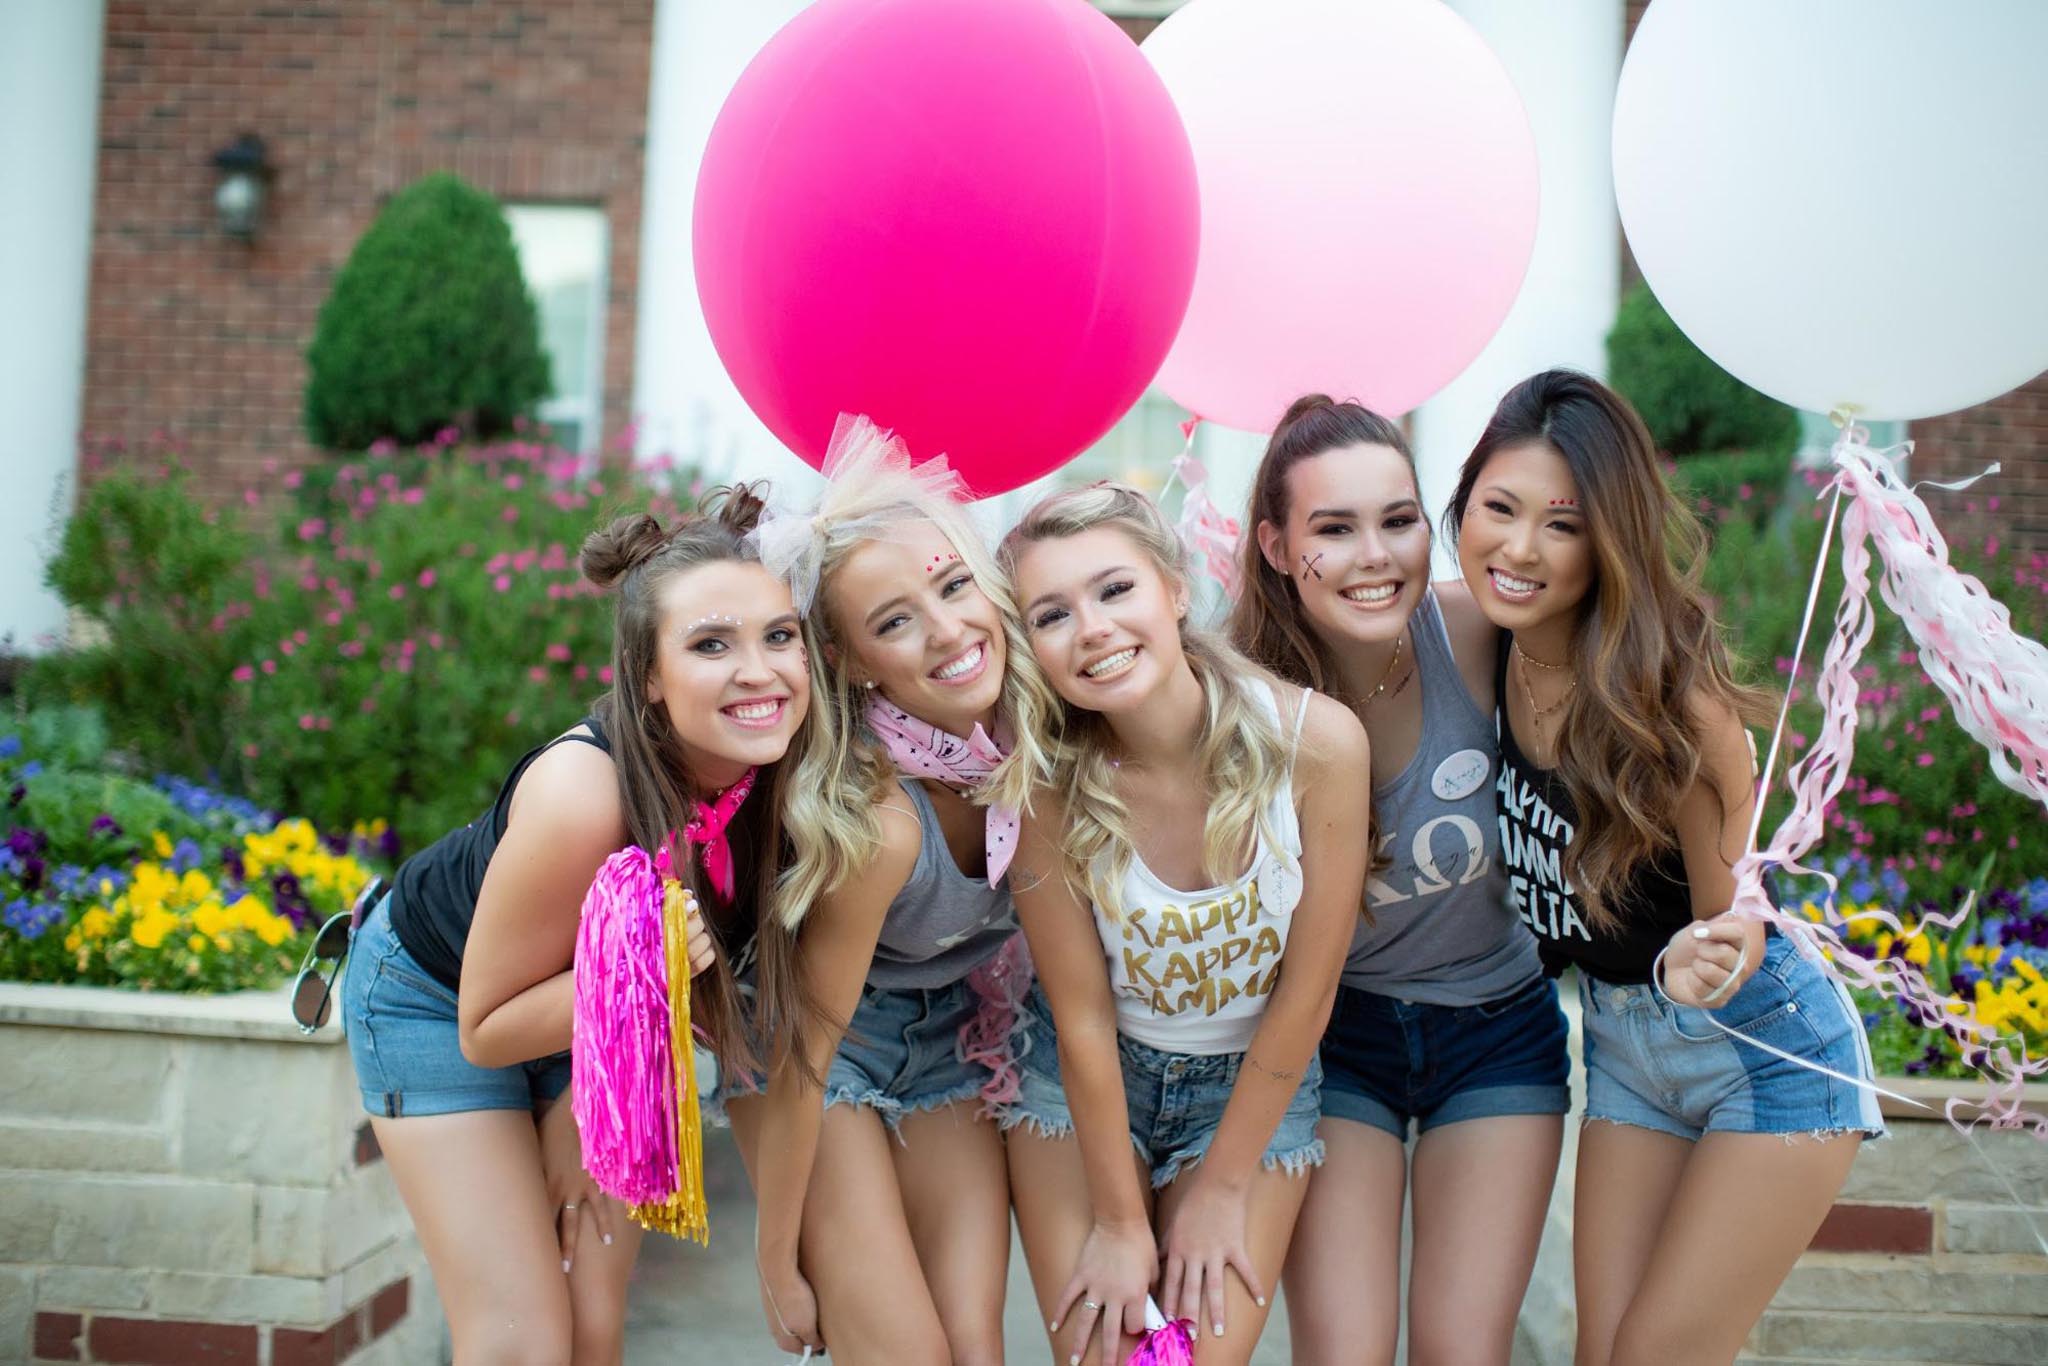 Sorority girls posing together holding large colorful balloons